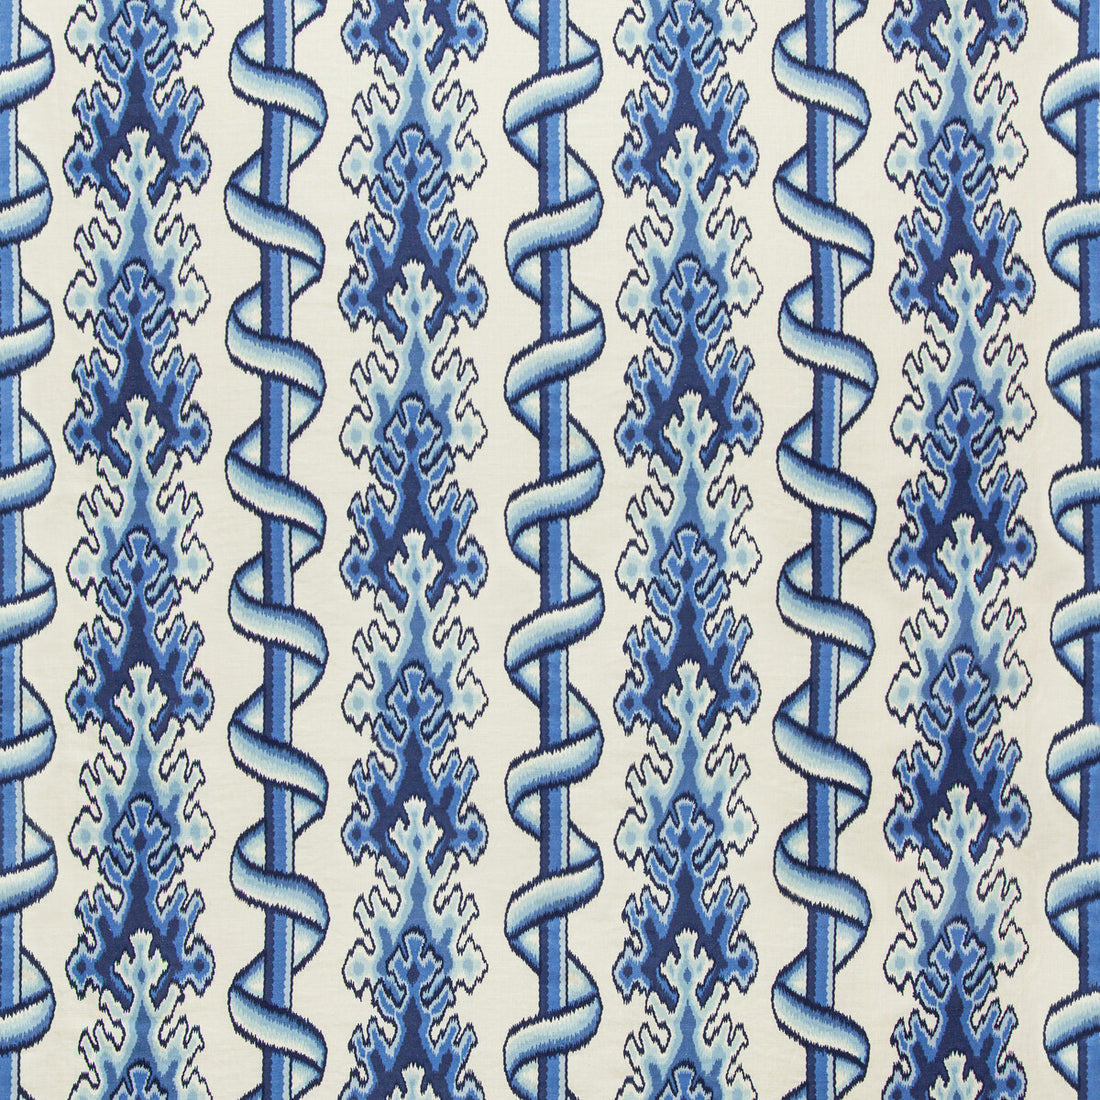 Montguyon Print fabric in blue/sky color - pattern 8020102.515.0 - by Brunschwig &amp; Fils in the Grand Bazaar collection